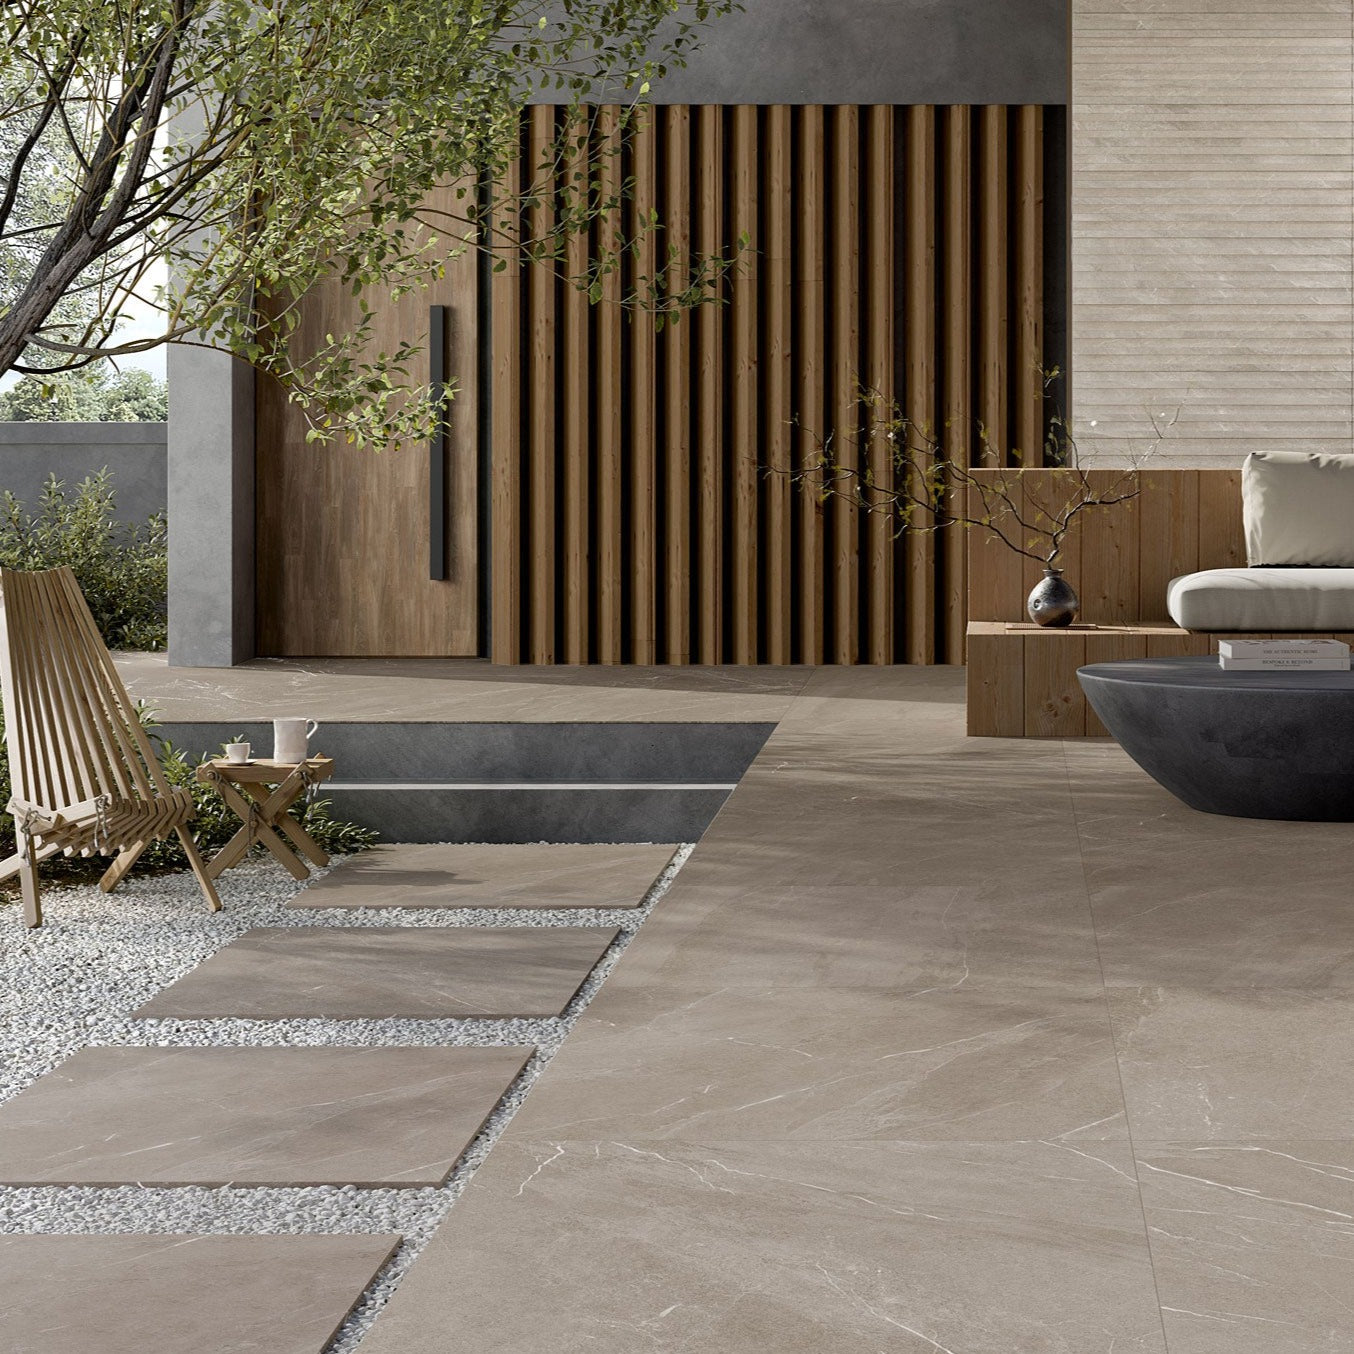 Rondine Angers Taupe Stone Effect 20mm Outdoor Italian Porcelain Slab Tile 100x100cm